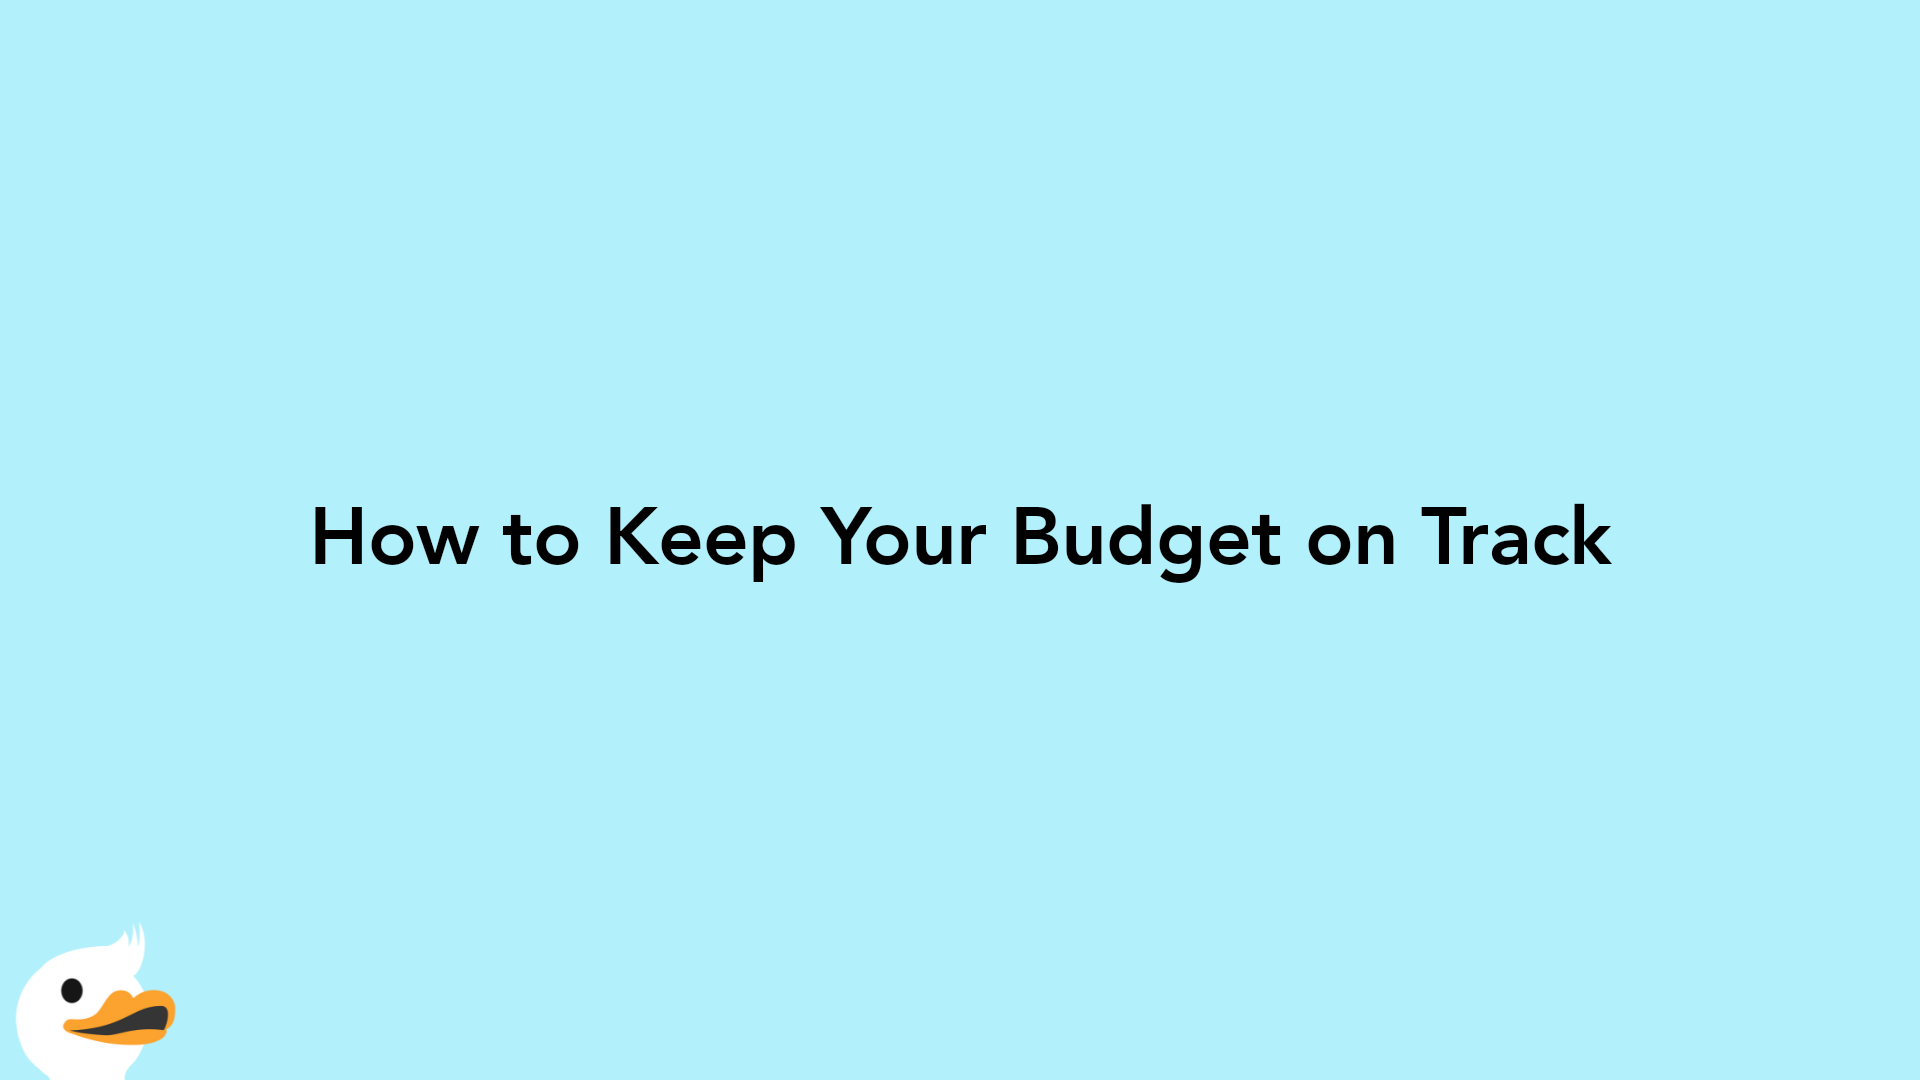 How to Keep Your Budget on Track